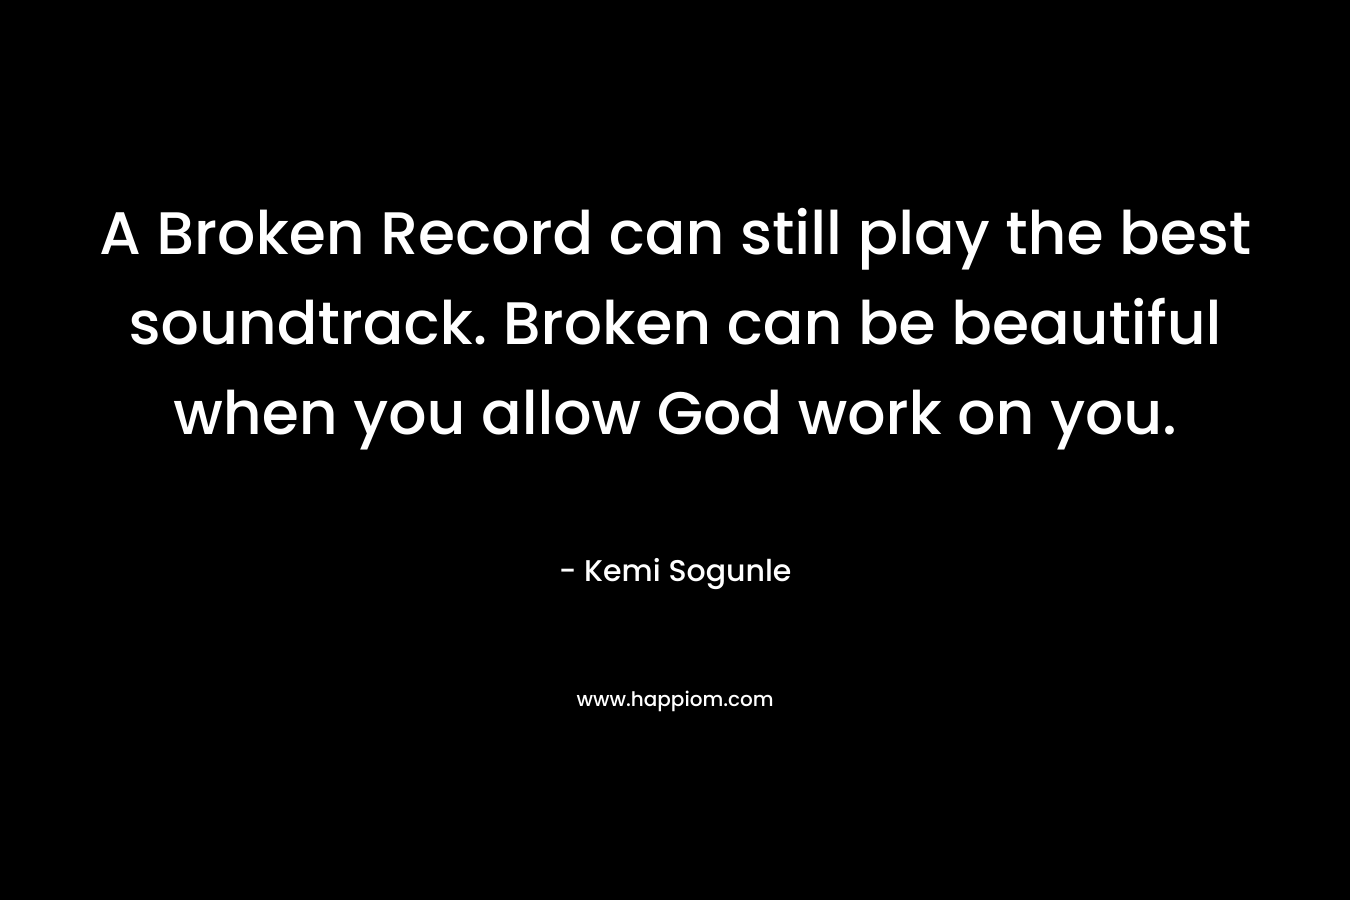 A Broken Record can still play the best soundtrack. Broken can be beautiful when you allow God work on you. – Kemi Sogunle